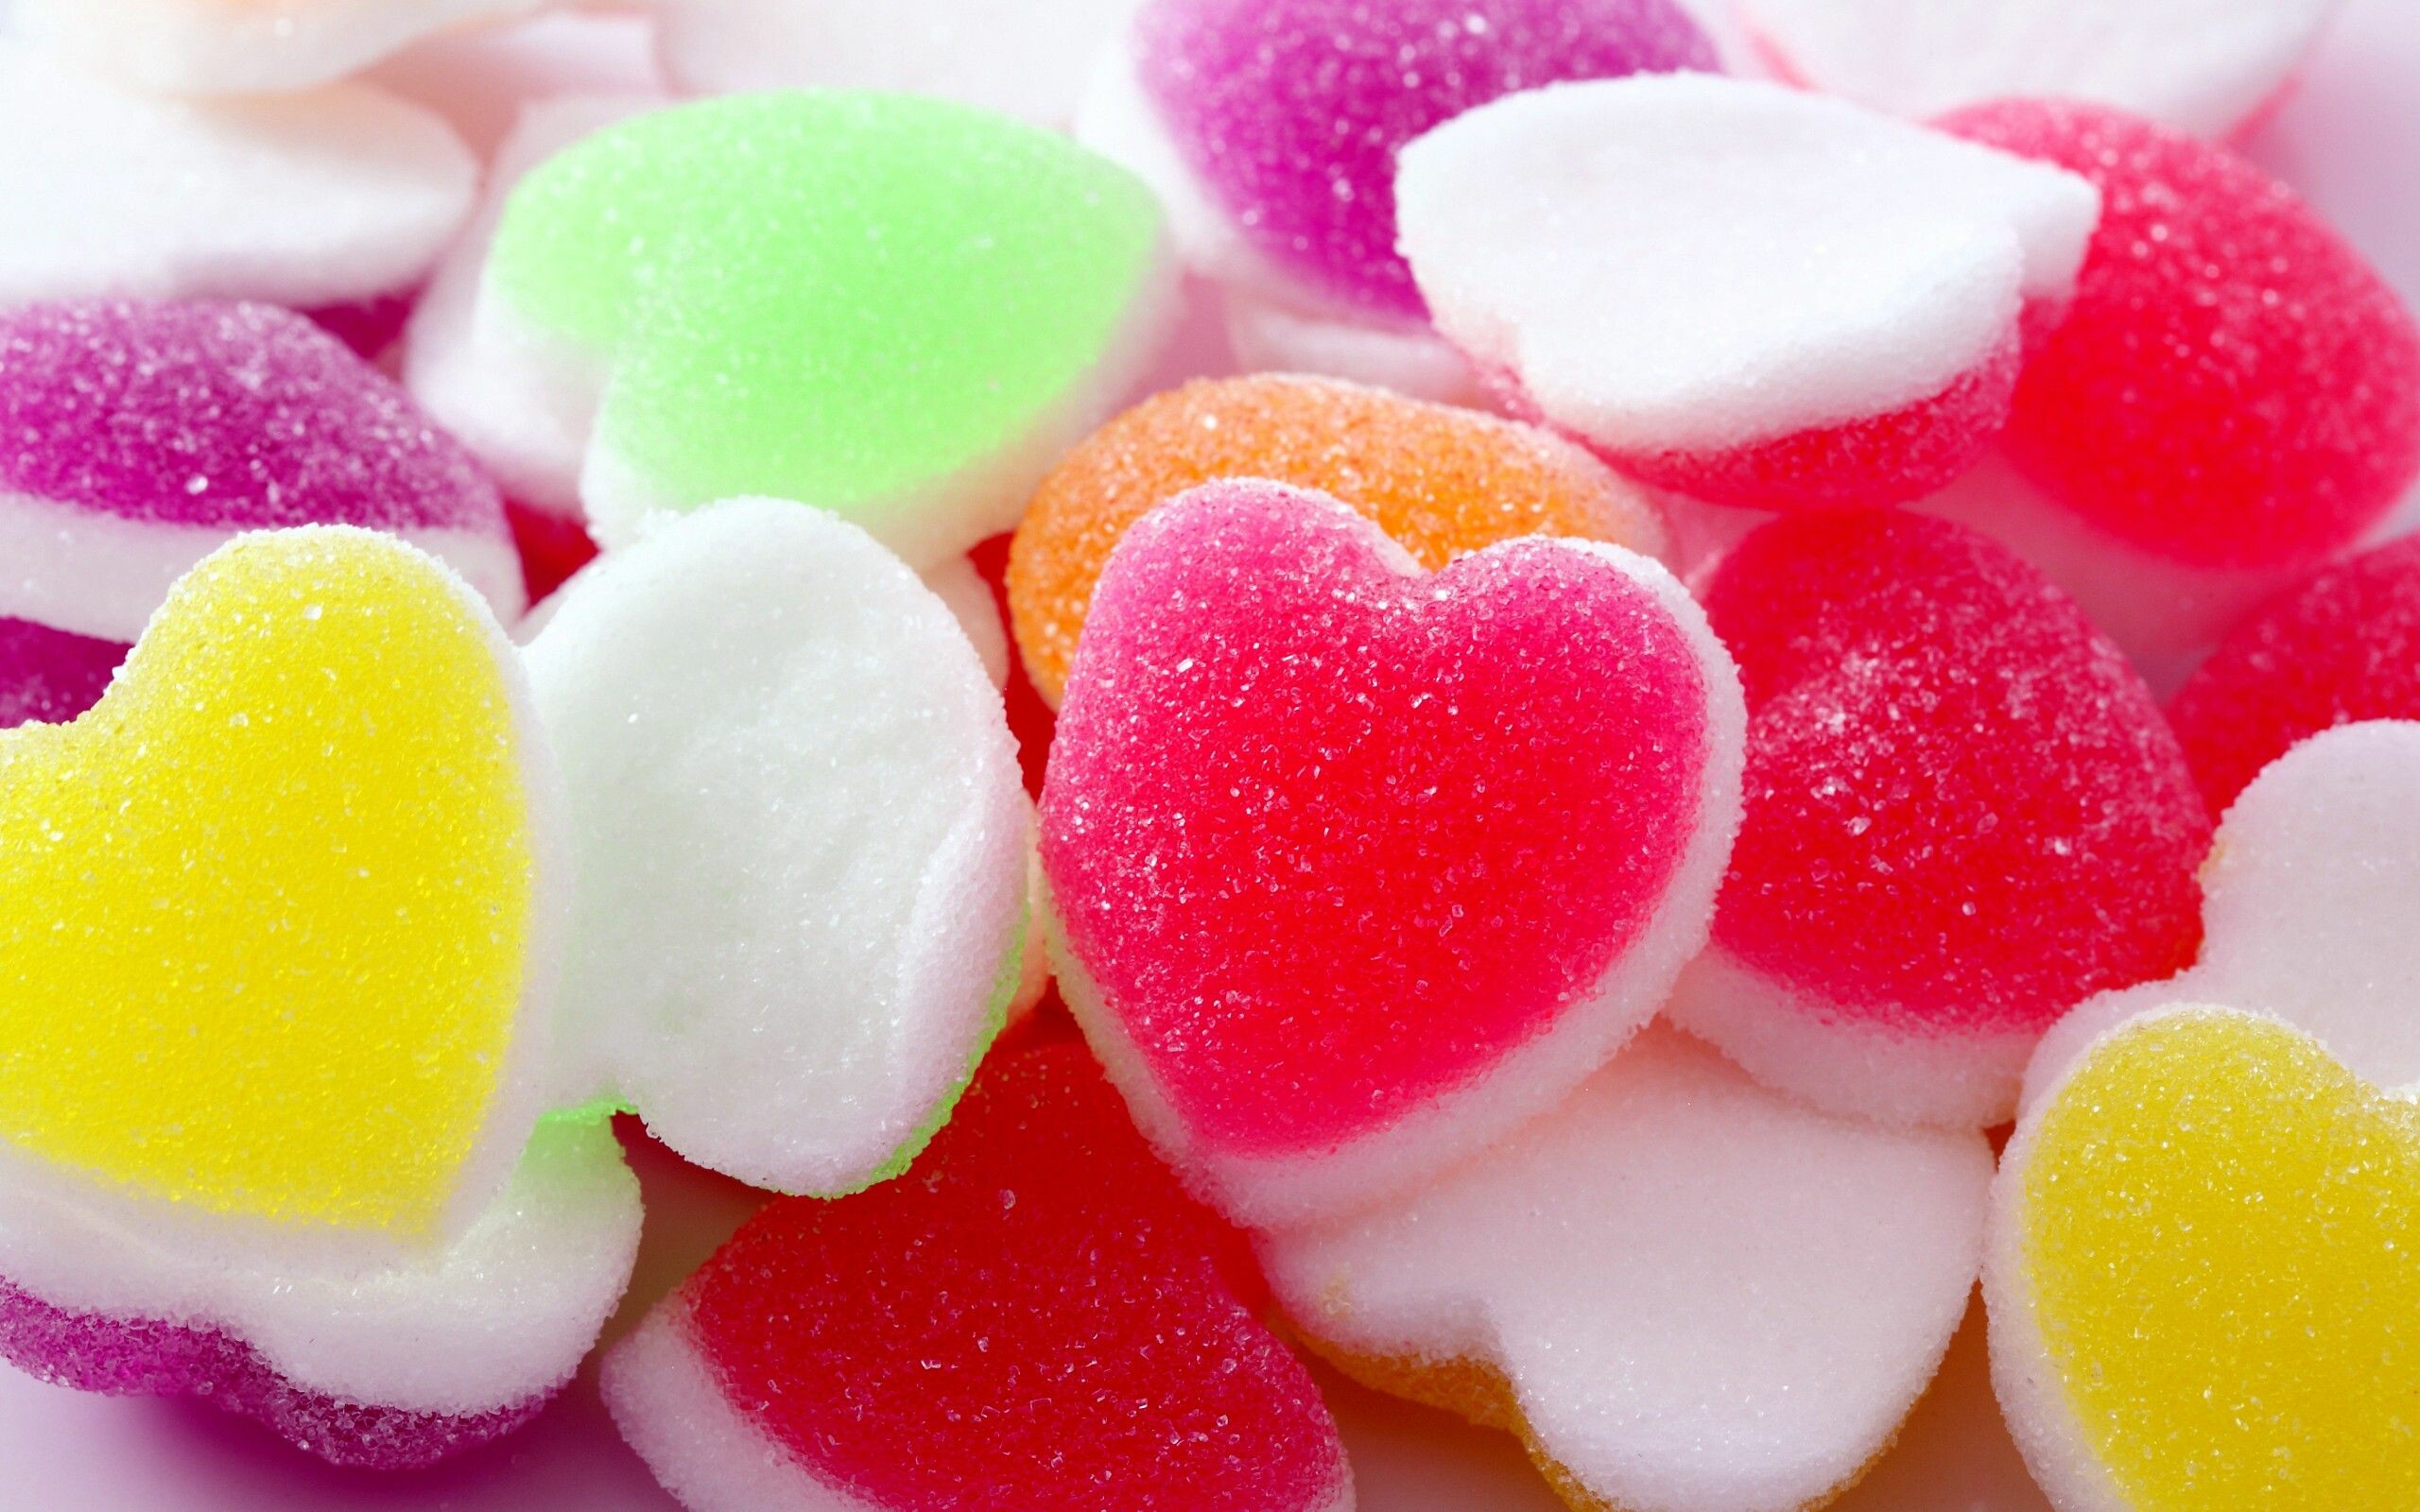 Candy and sweets wallpapers, Colorful treats, Delicious confections, Tempting indulgence, 2560x1600 HD Desktop